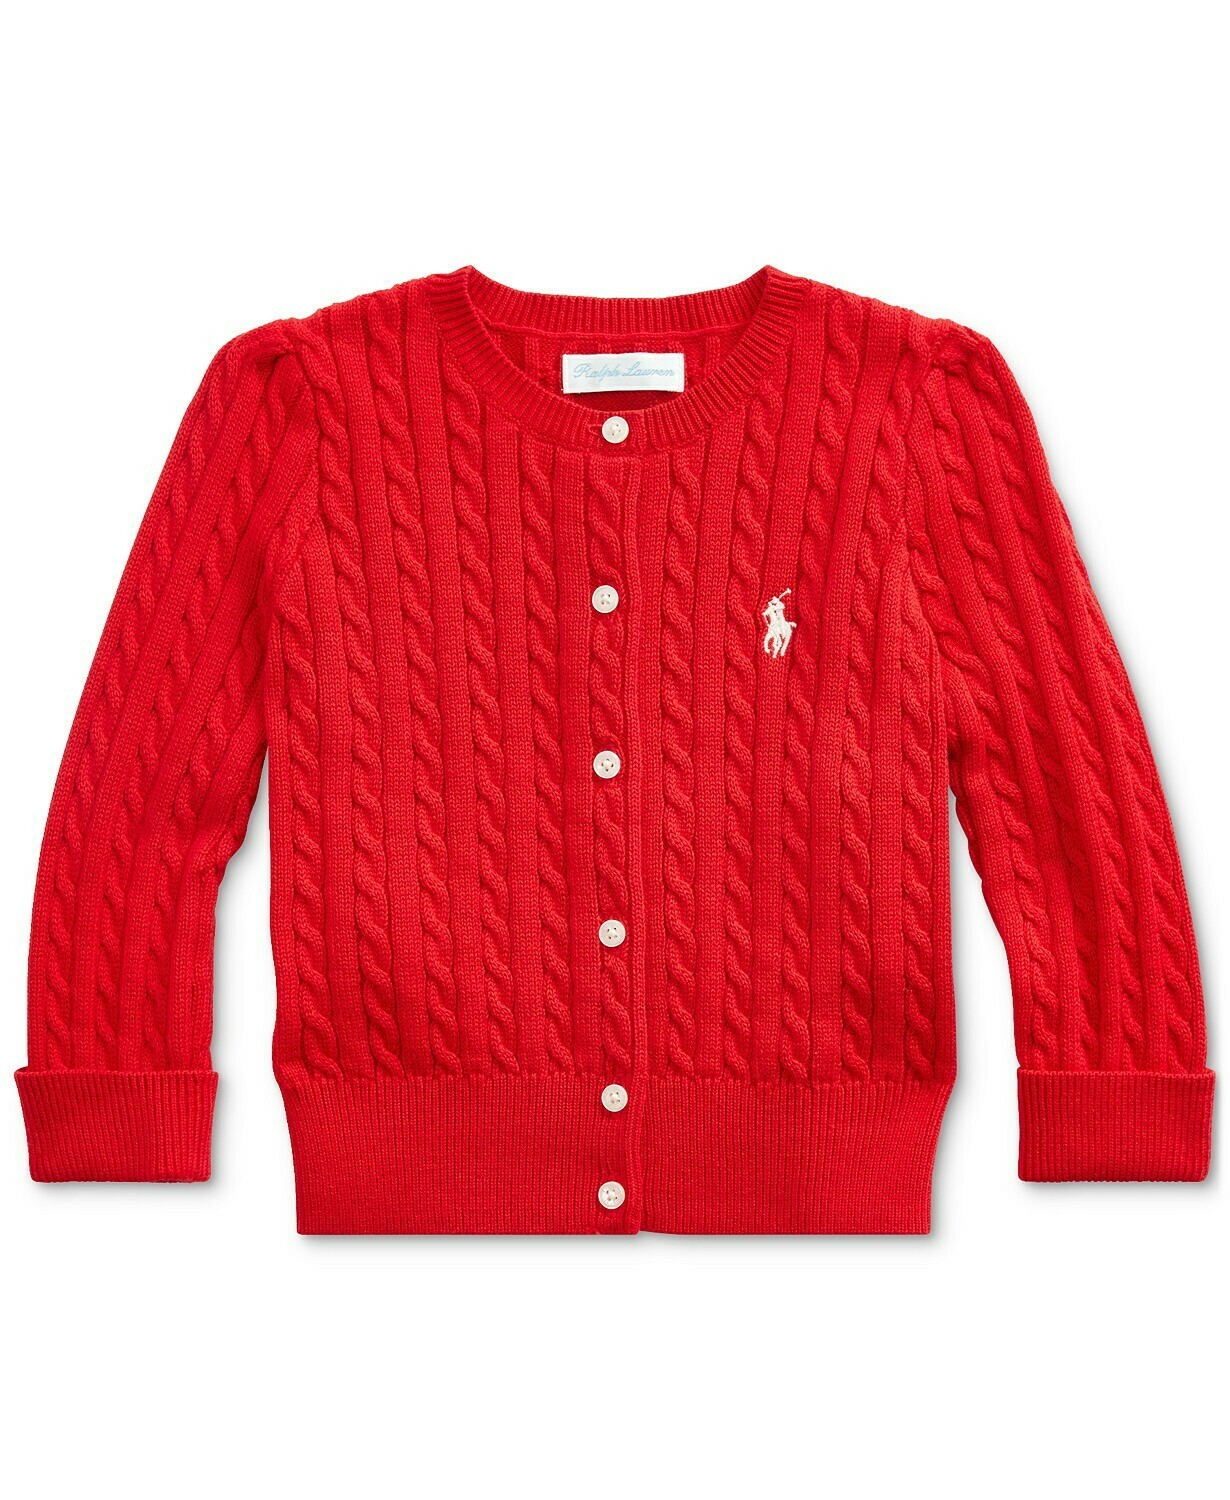 Polo Ralph Lauren Baby Girl's Cable-Knit Cotton Cardigan